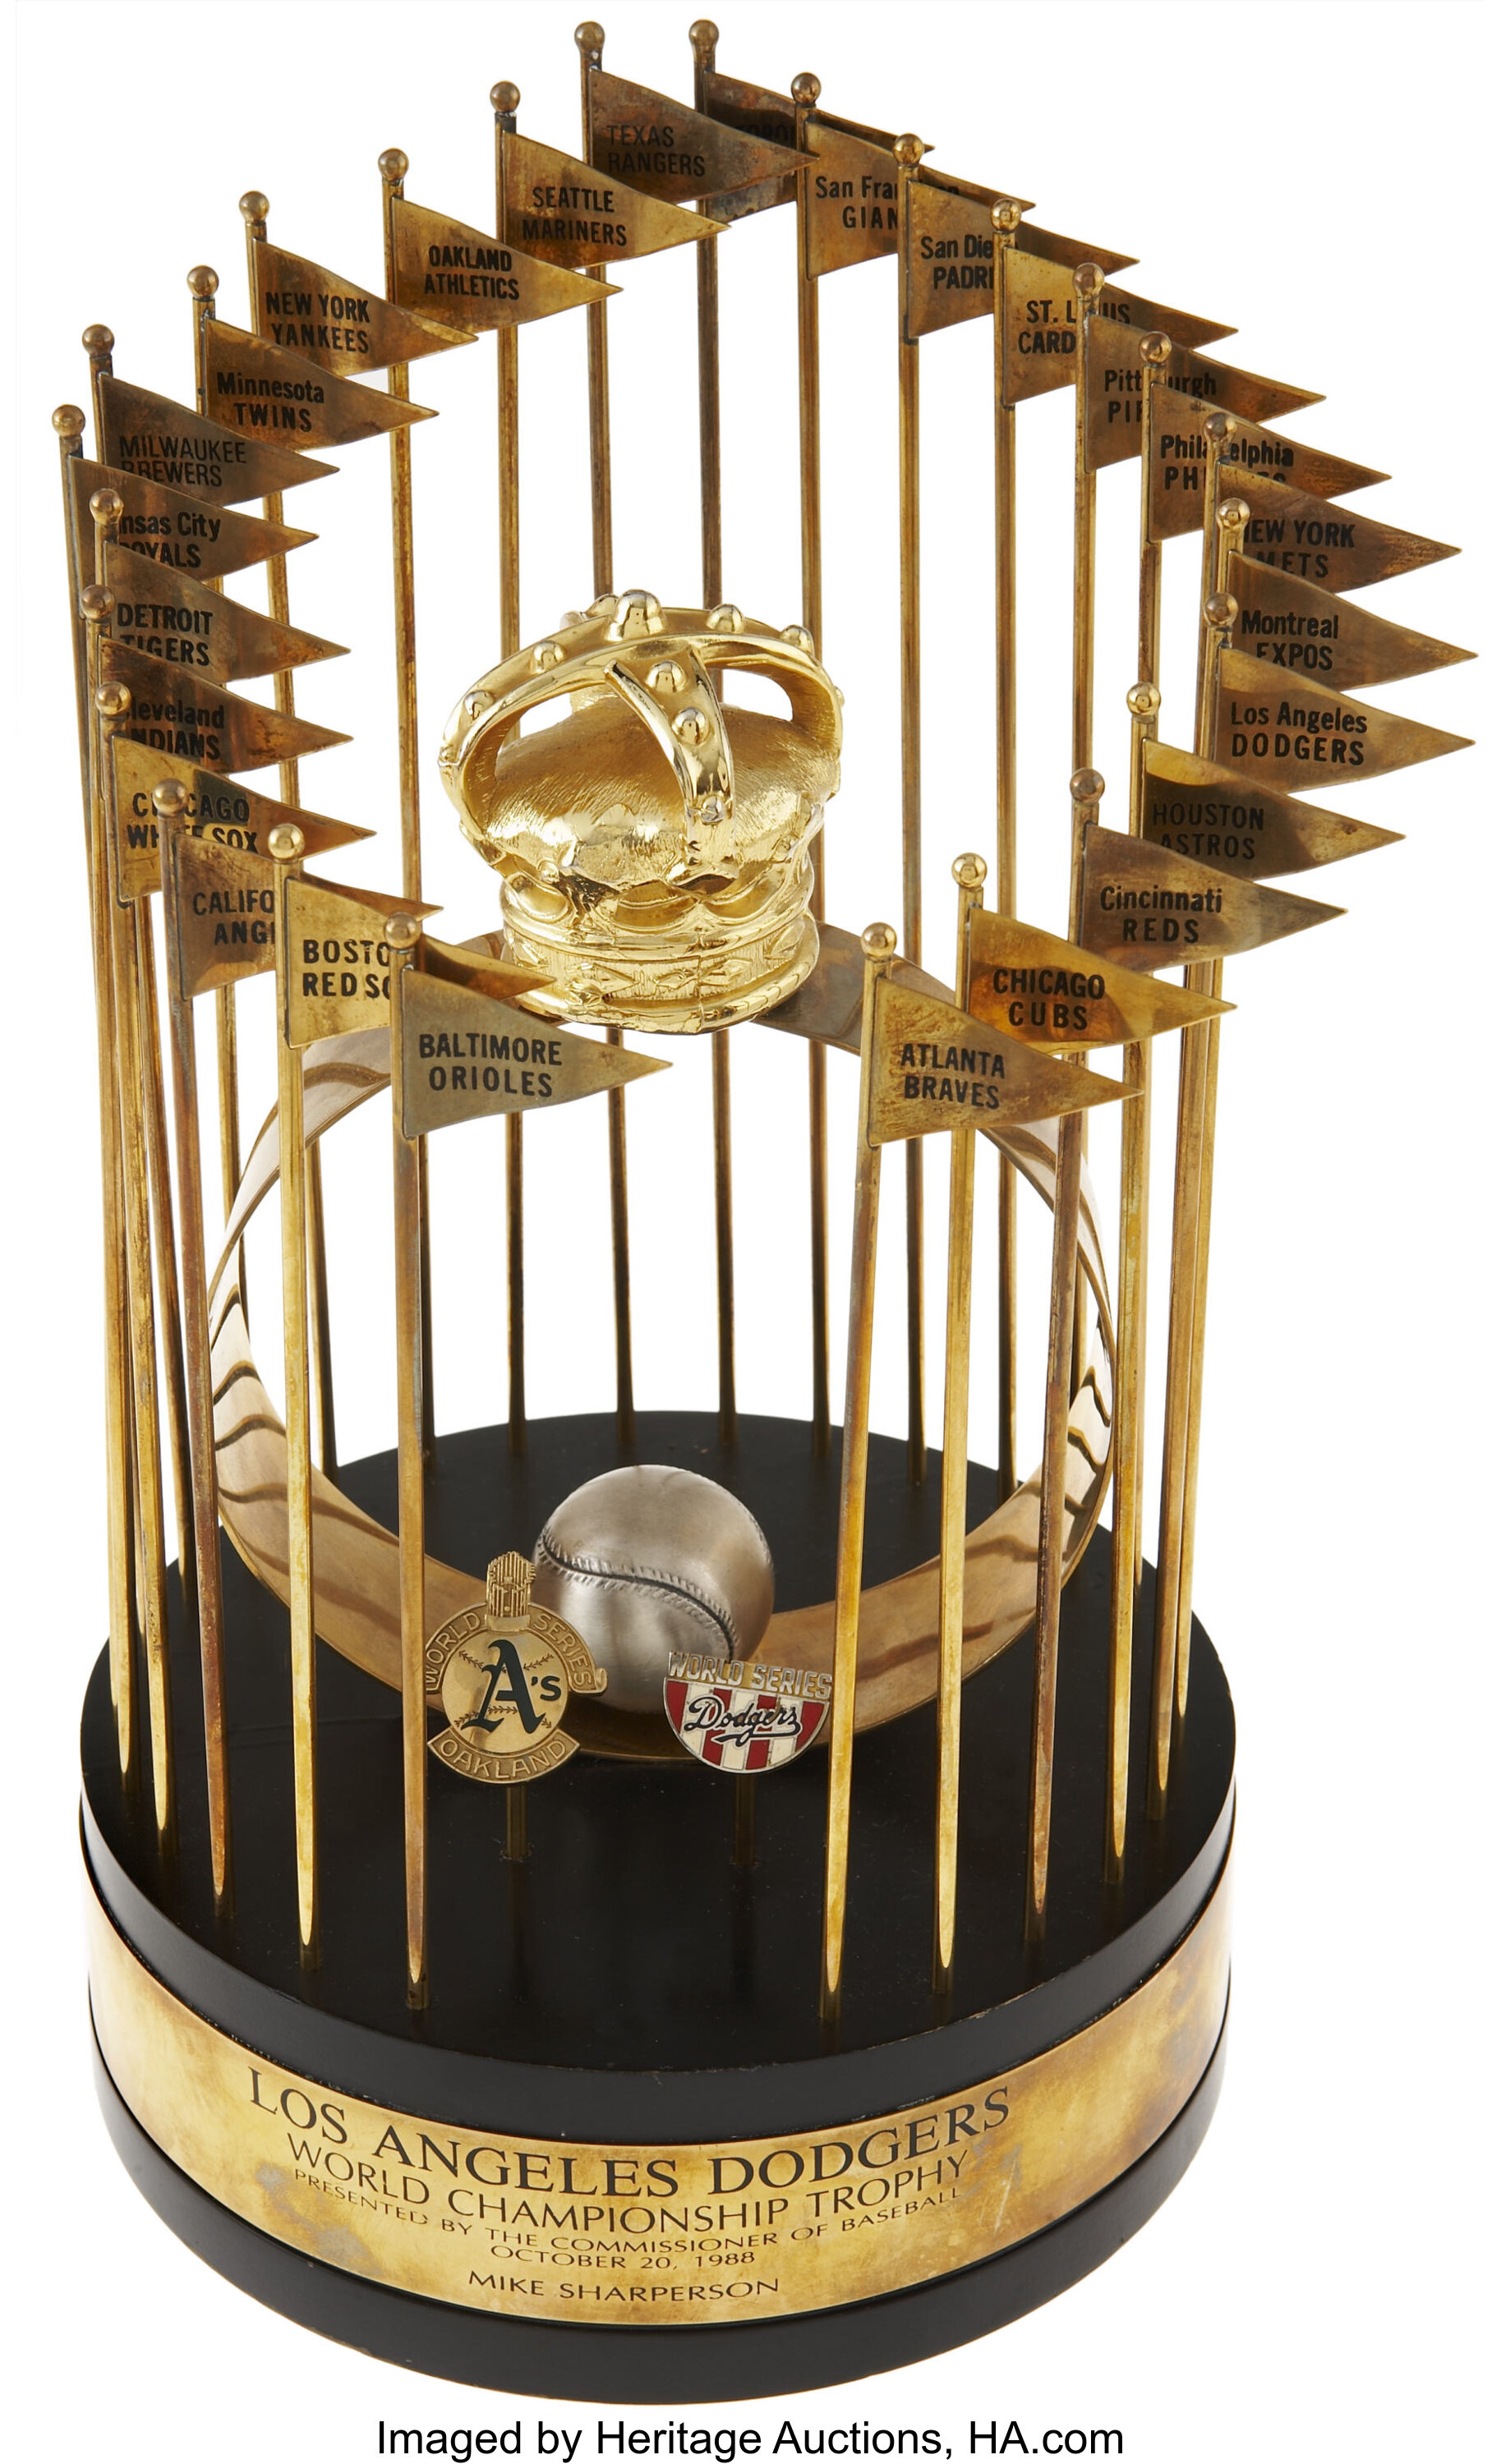 1988 Los Angeles Dodgers World Championship Trophy Presented to